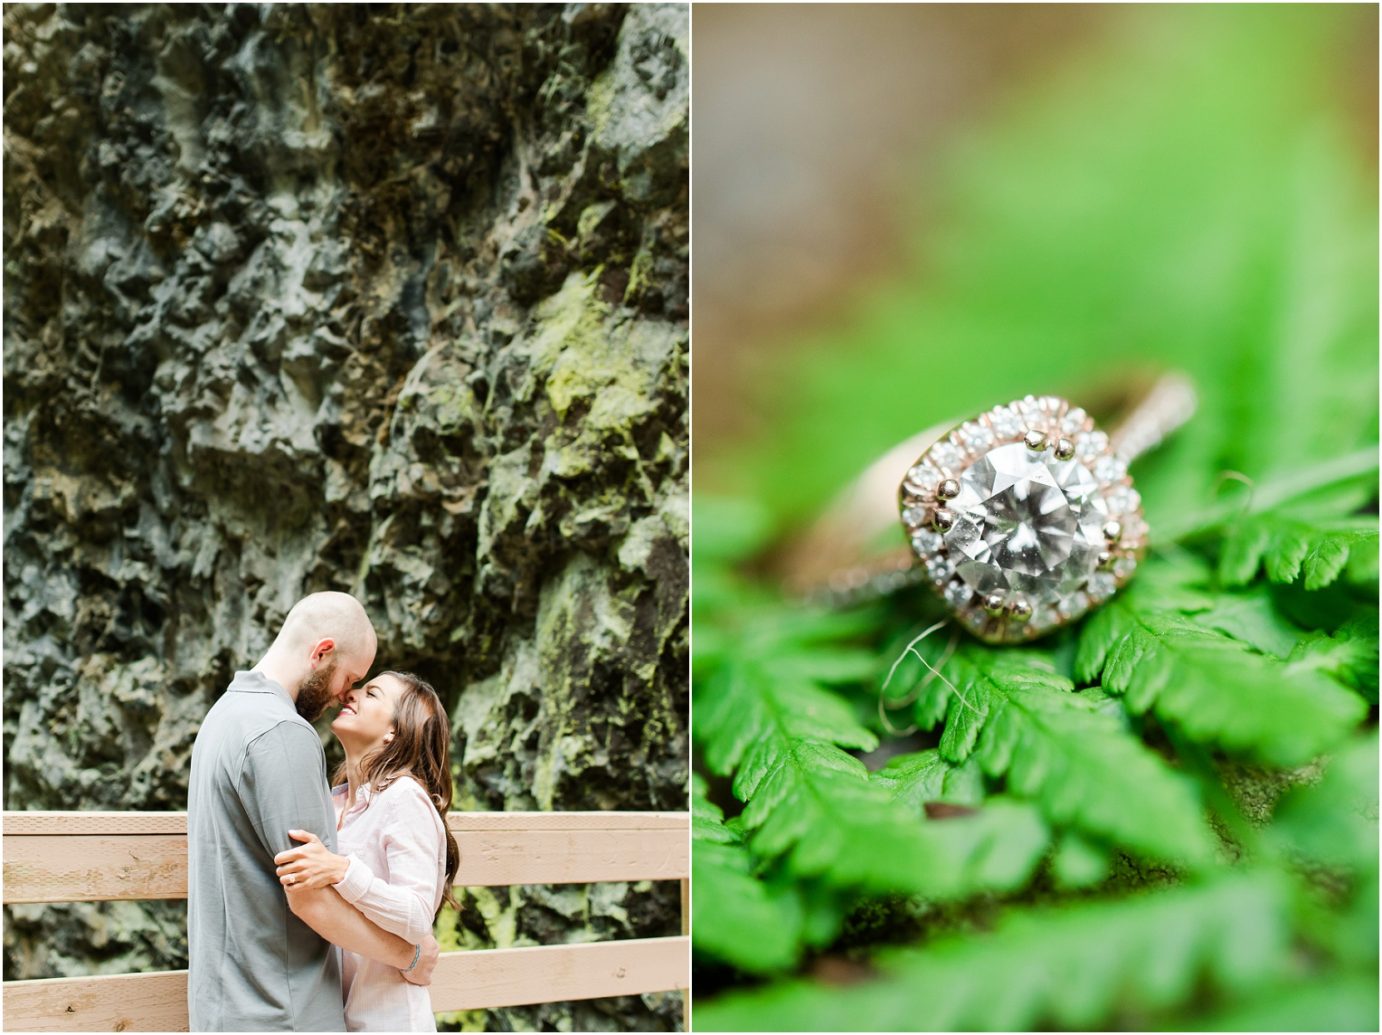 Boulder Cave Engagement Session Naches WA Couple in front of cave